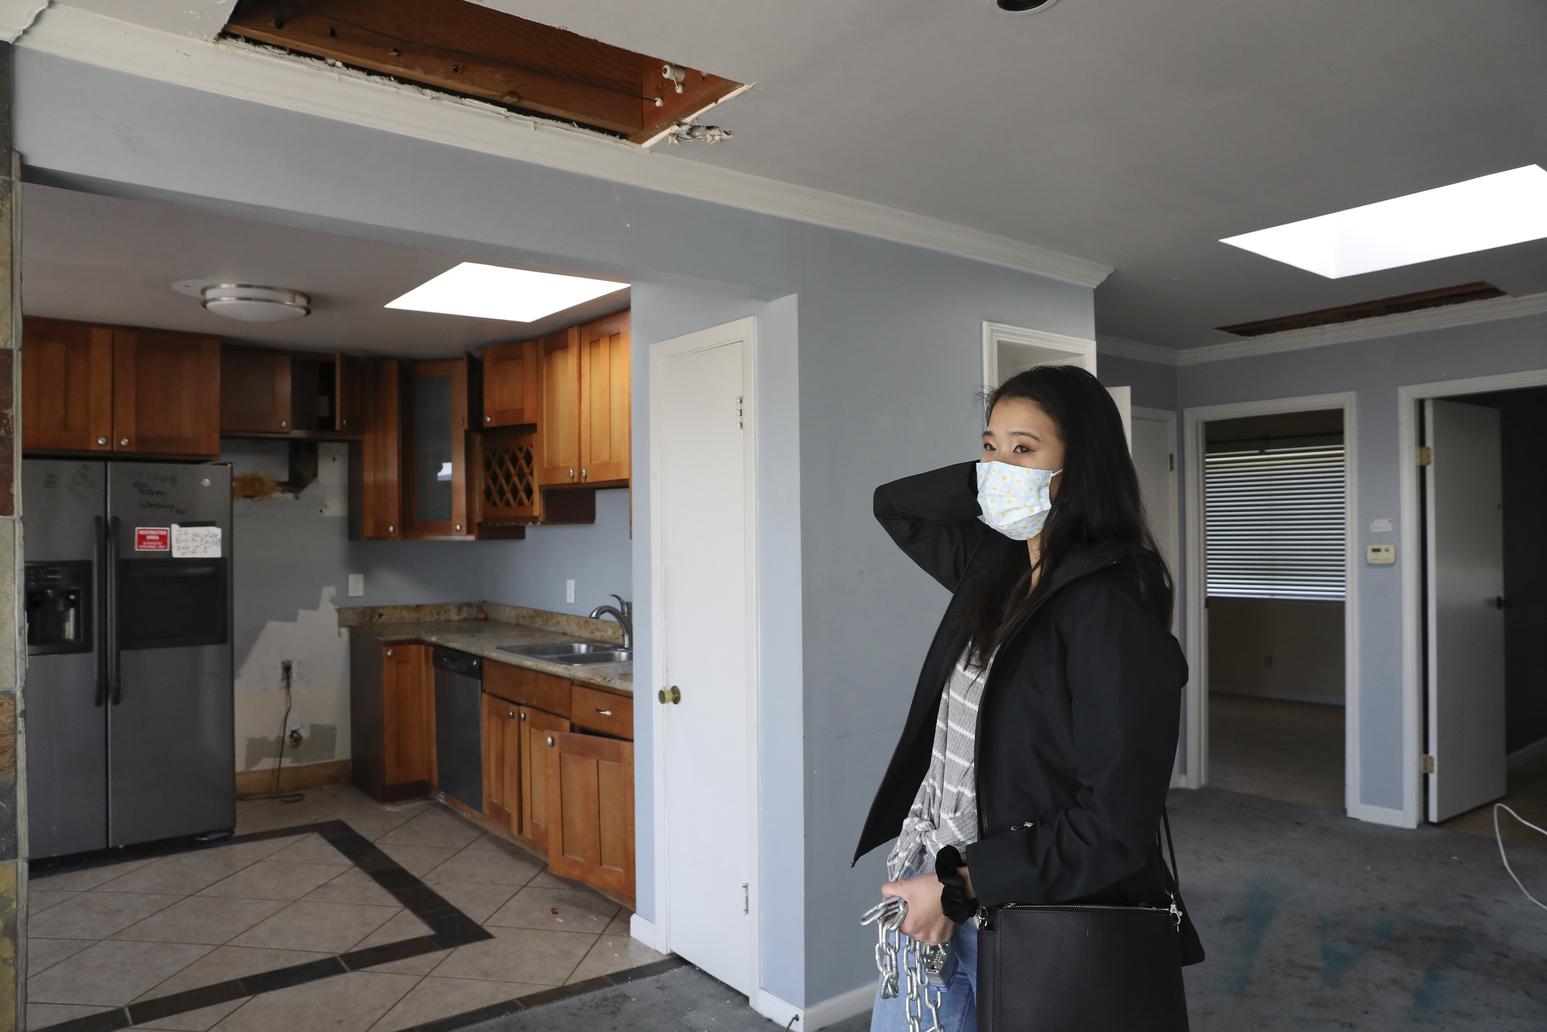 How a San Francisco remodel turned into an epic nightmare involving city red tape, squatters and cops shrugging off crime